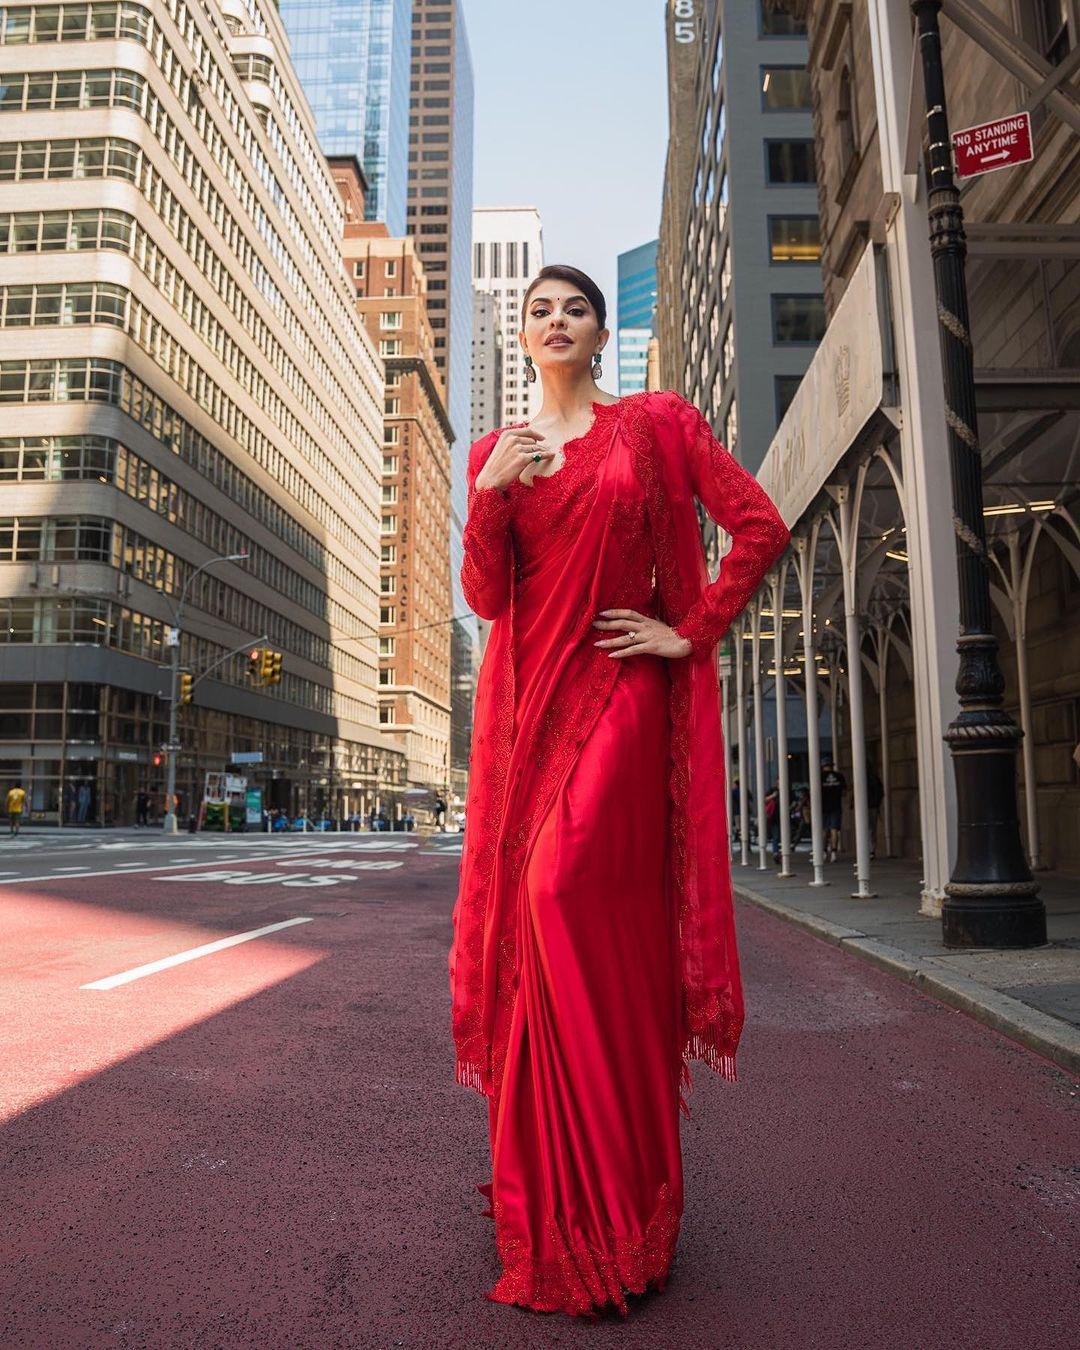 Jacqueline Fernandez is often seen out and about in America